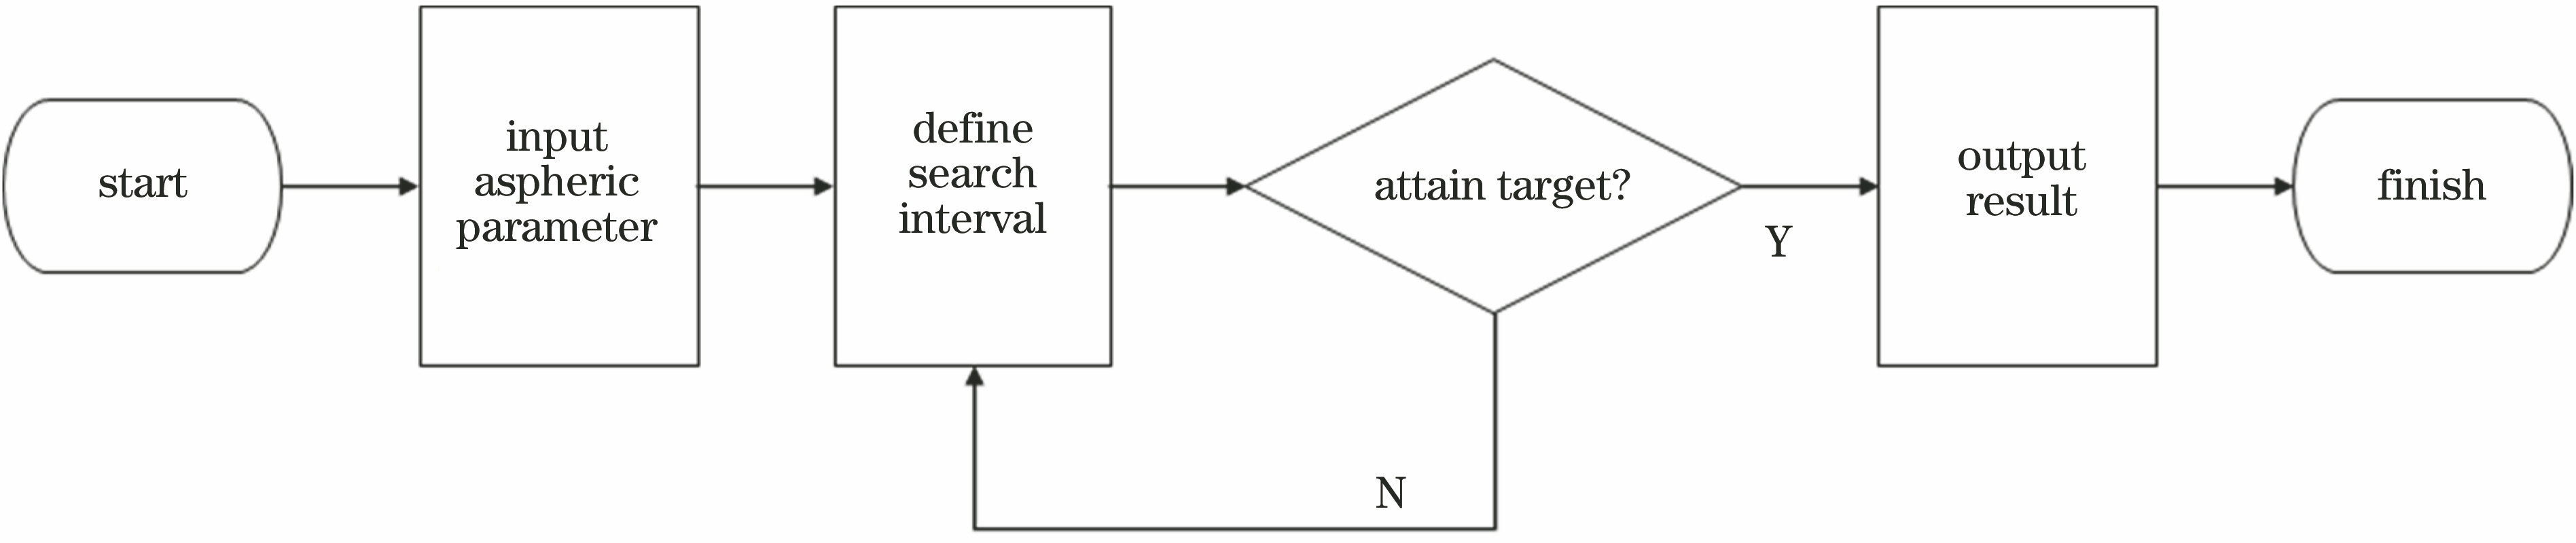 Flowchart of search algorithm closest to sphere